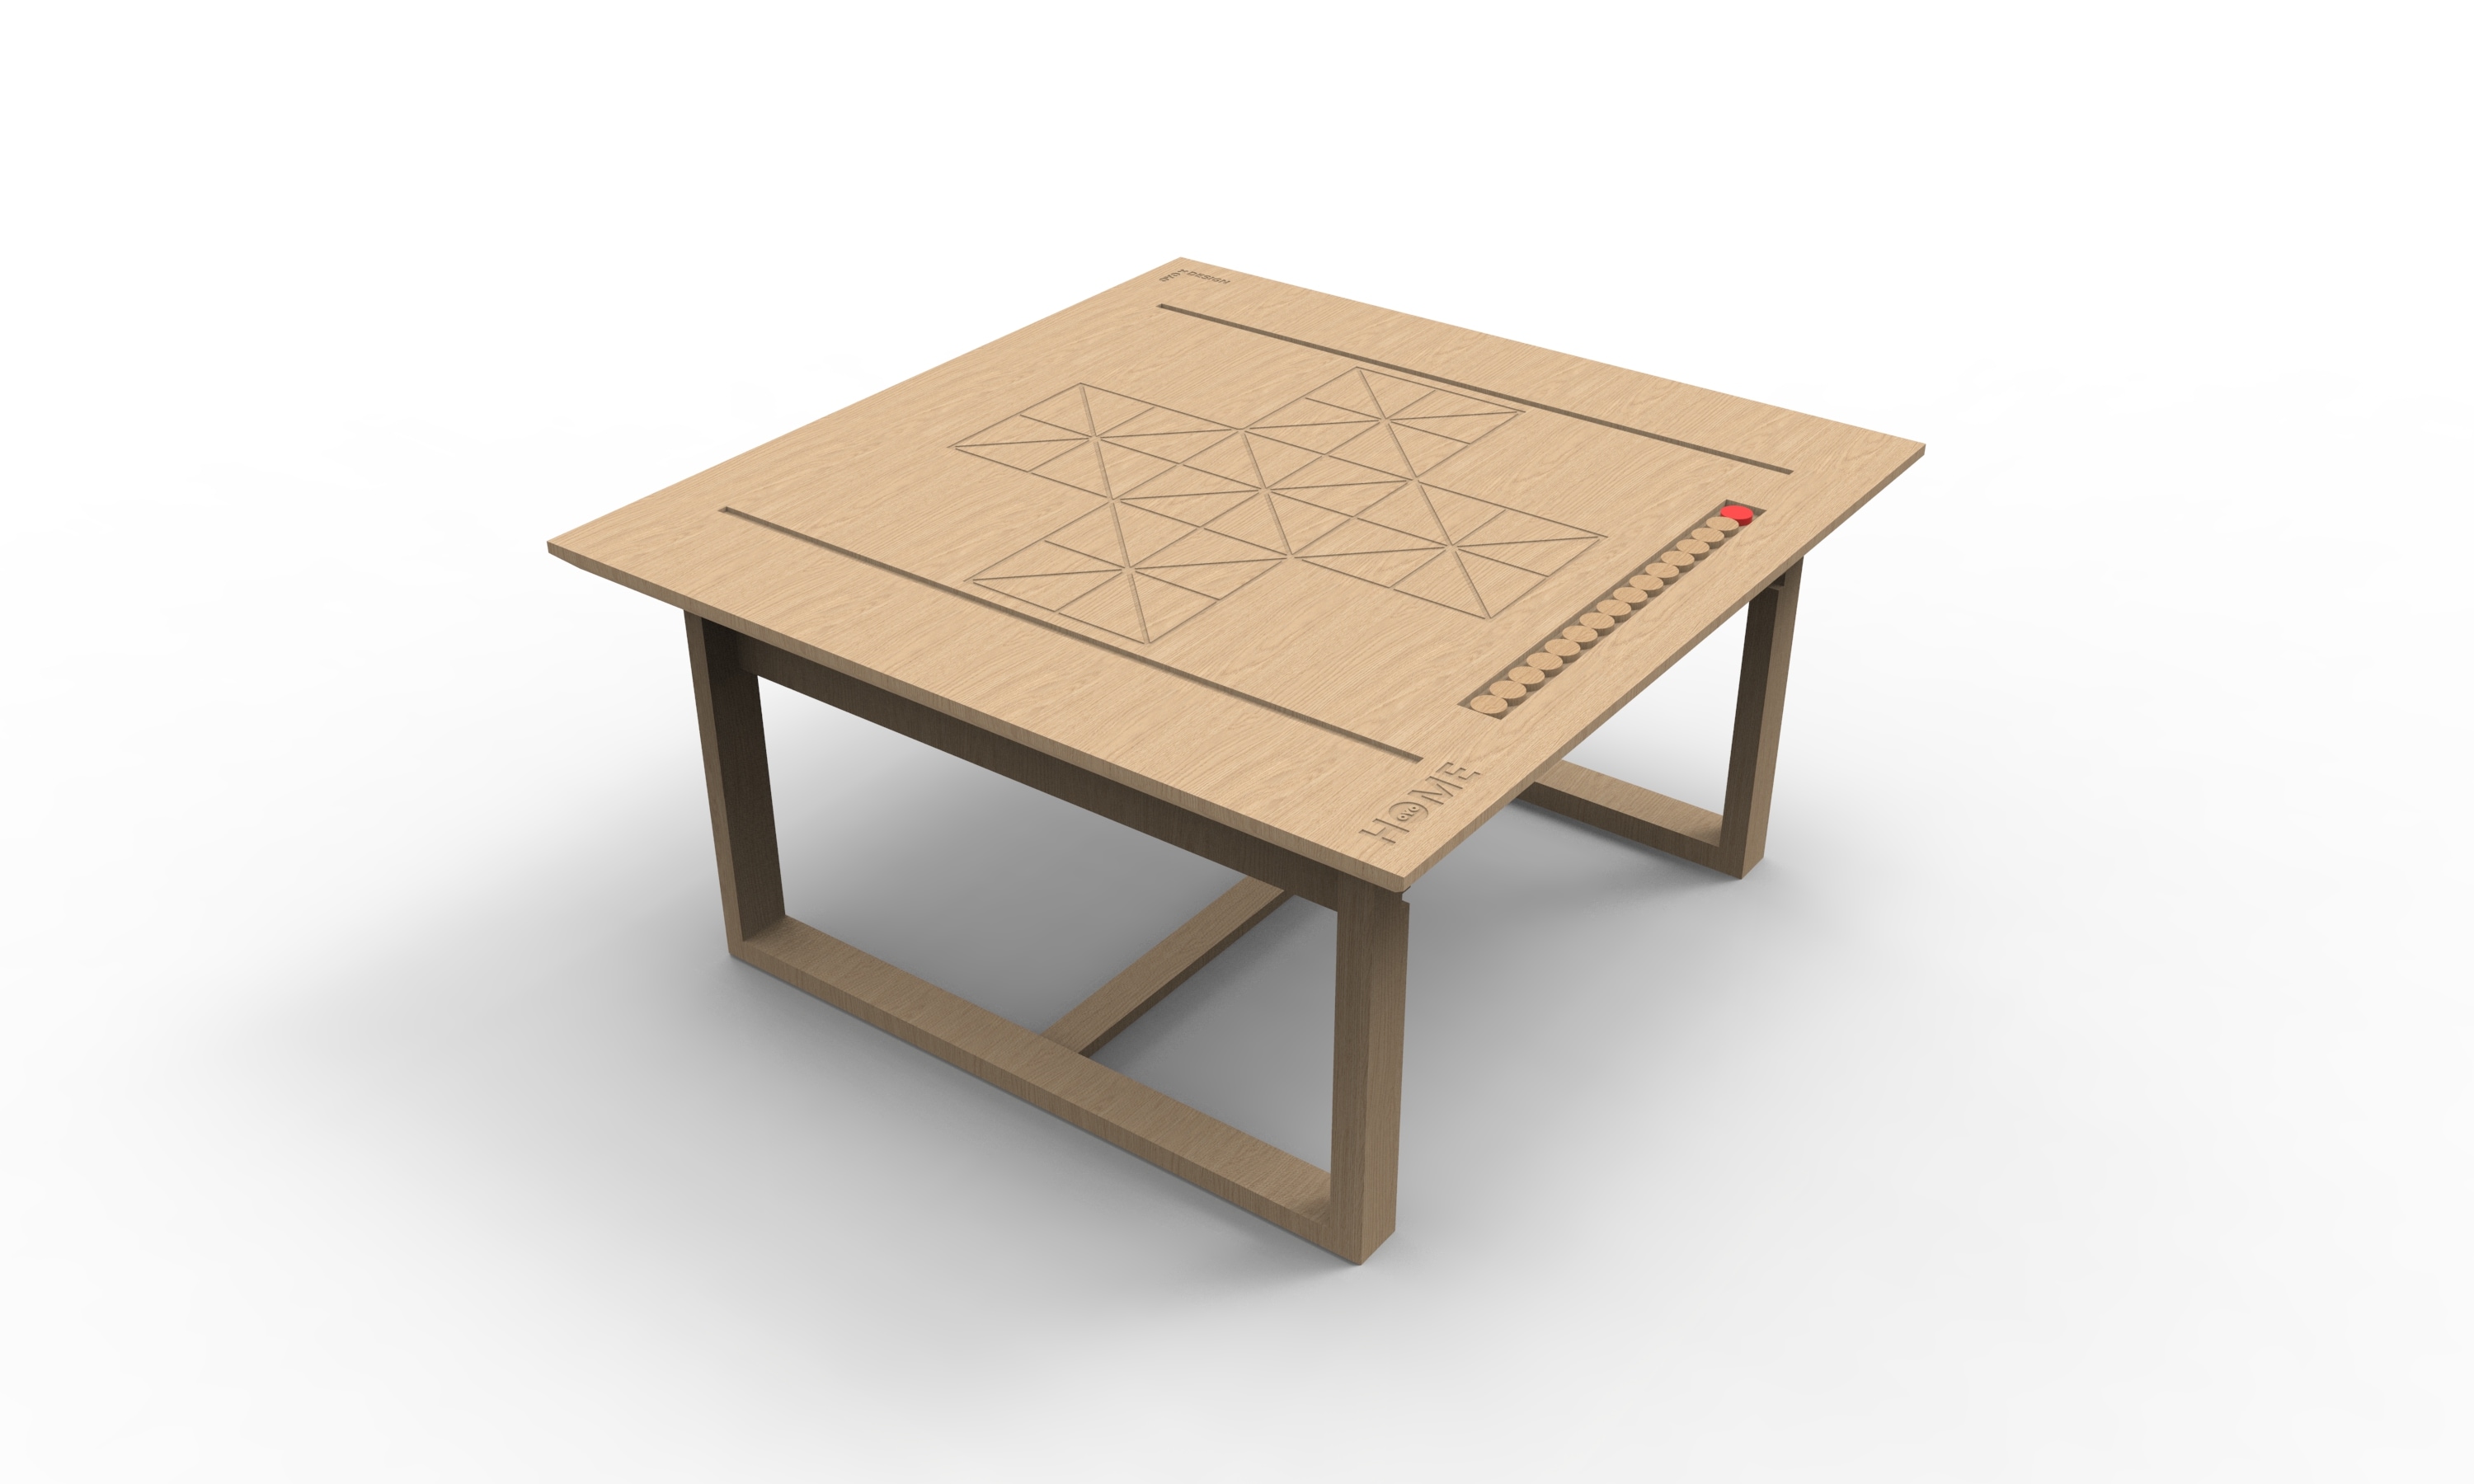 OYO Home’s latest brew – a coffee table that’s also 3 board games!